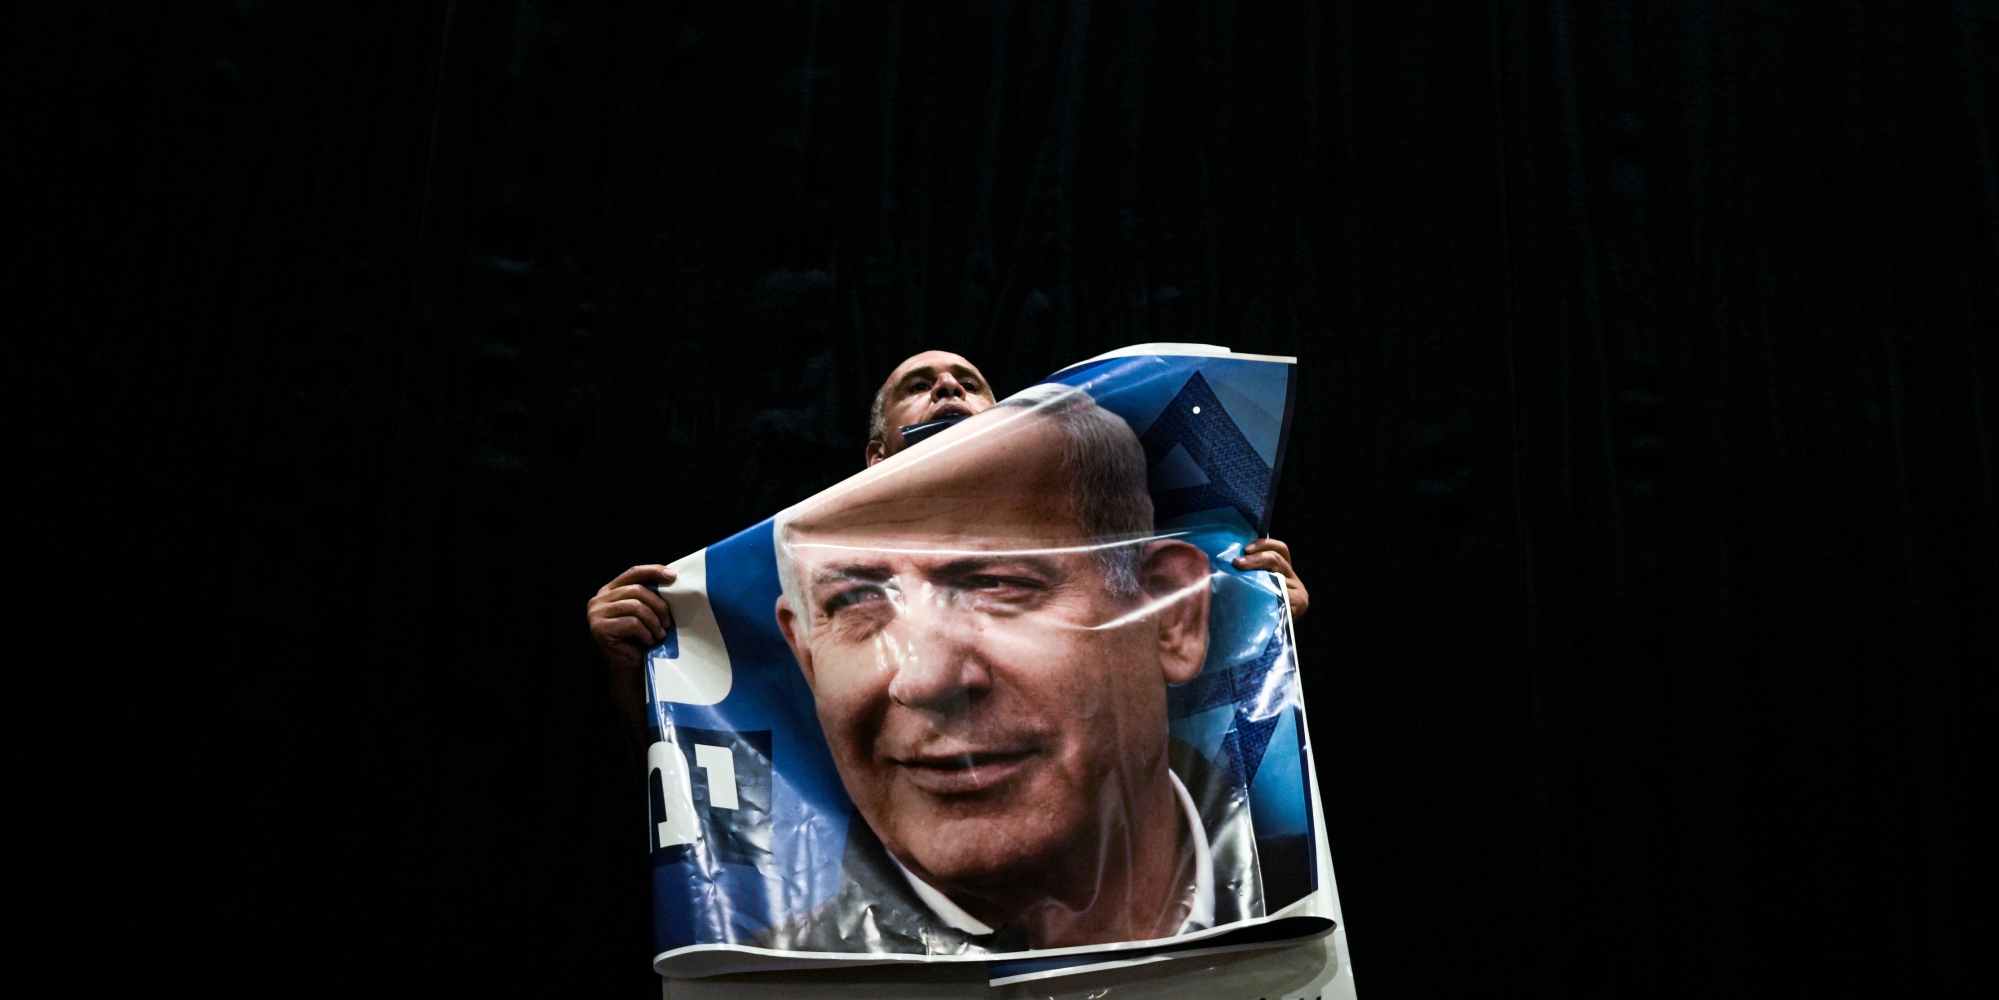 A Likud party supporter holds a poster of the party's head and former Israeli Prime Minister Benjamin Netanyahu as he delivers an election campaign in Migdal Haemek, northern Israel, Sunday, Oct. 23, 2022. Israel is heading into its fifth election in under four years on Nov. 1. (AP Photo/Ariel Schalit)